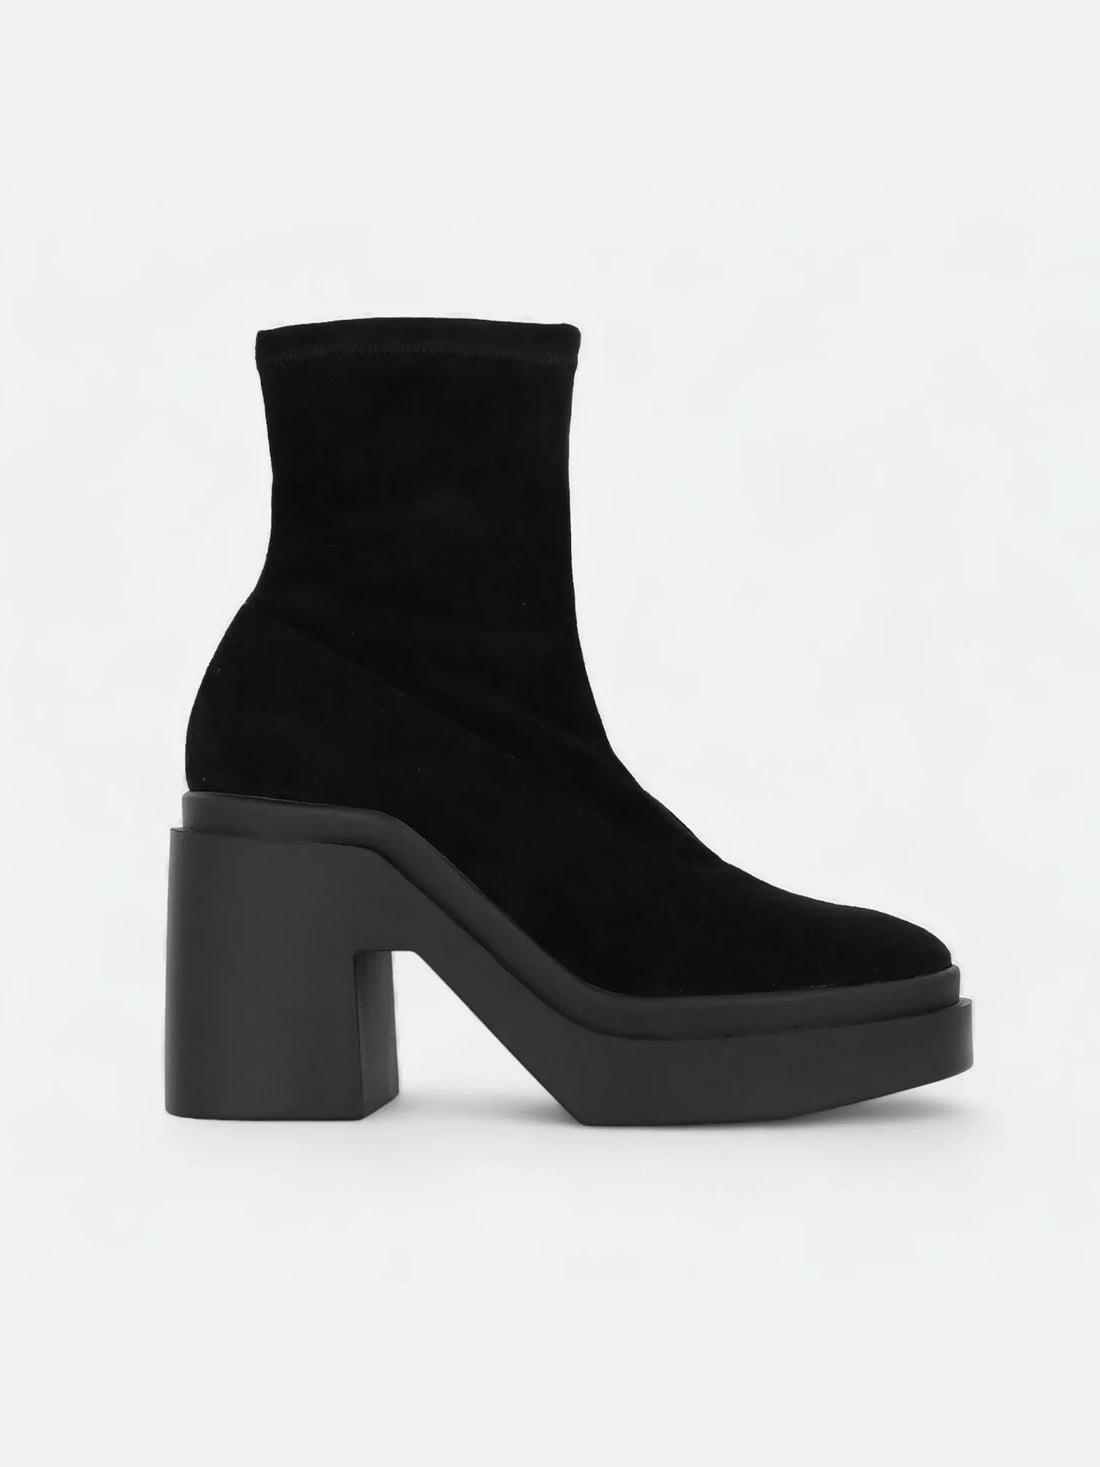 NINA ankle boots, suede leather black || OUTLET